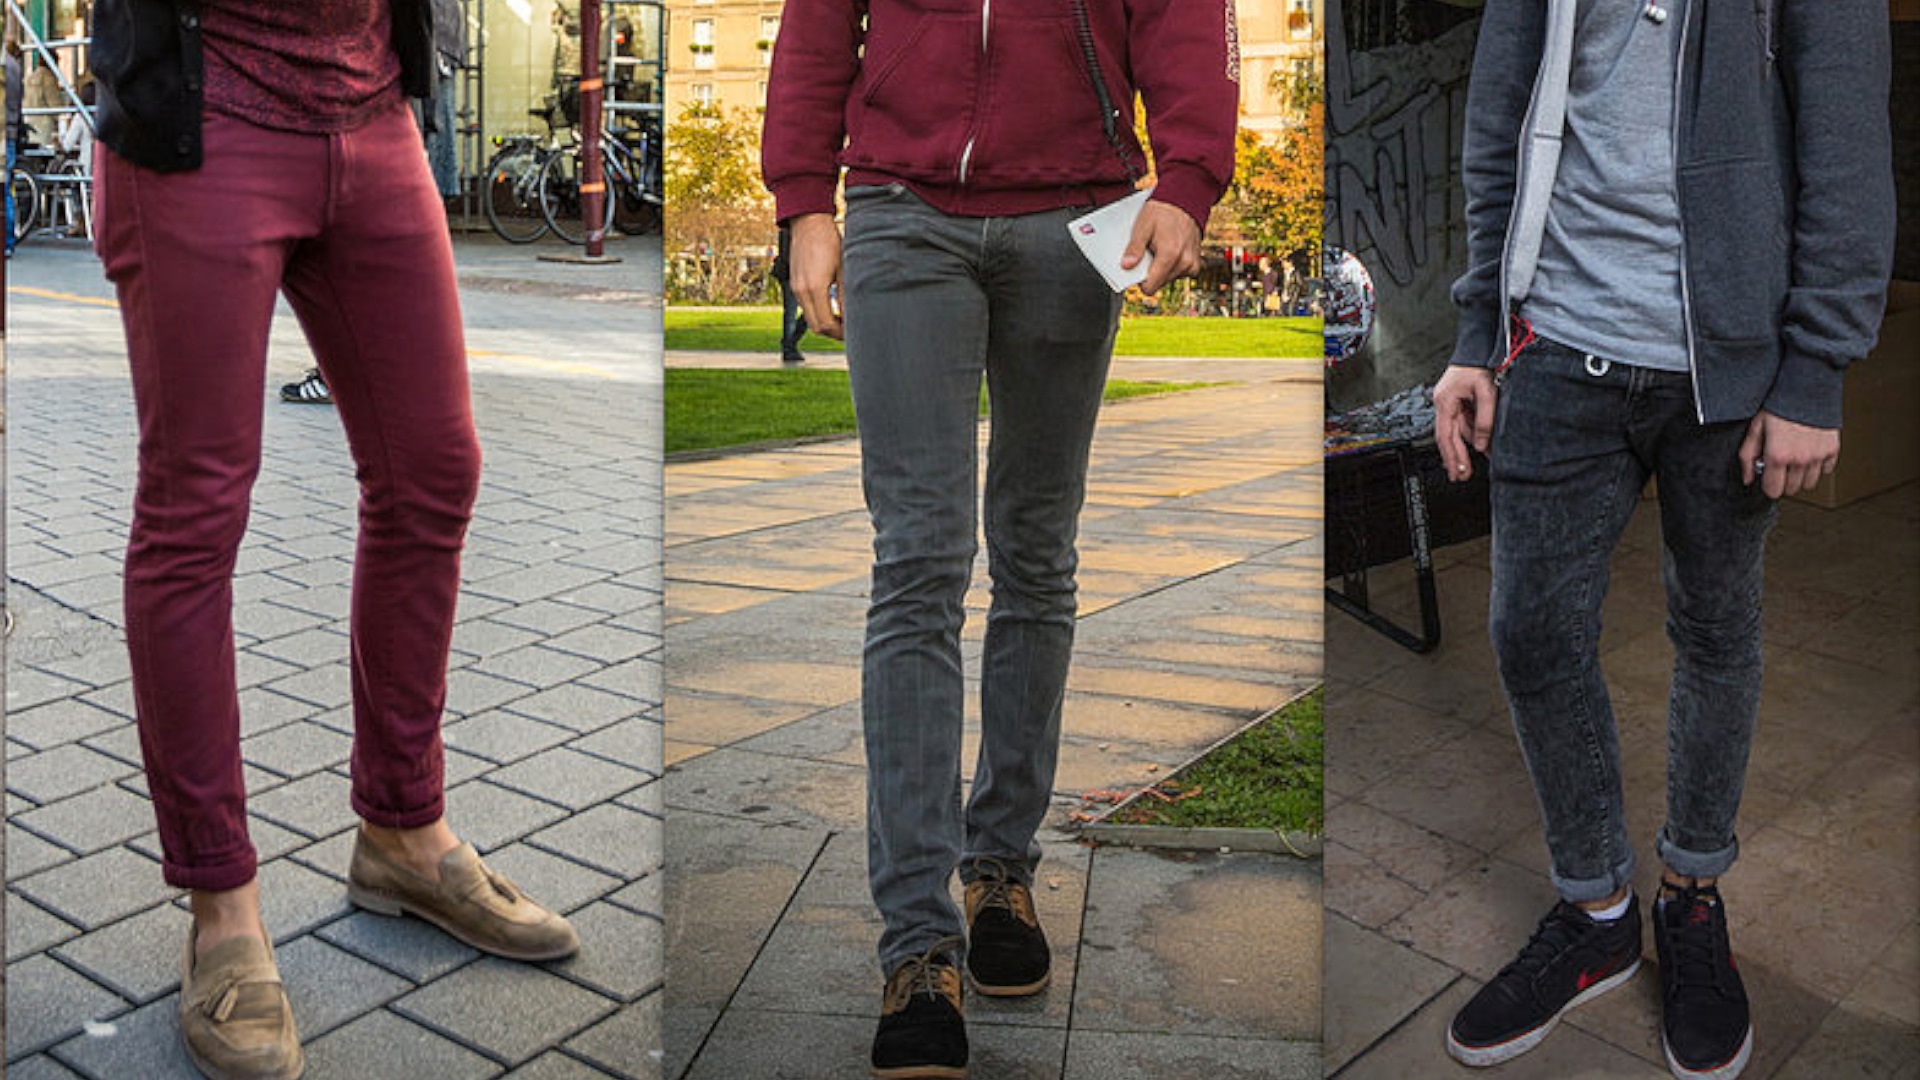 How real men wear their pants  Men in tight pants, Tight jeans men,  Hipster mens fashion